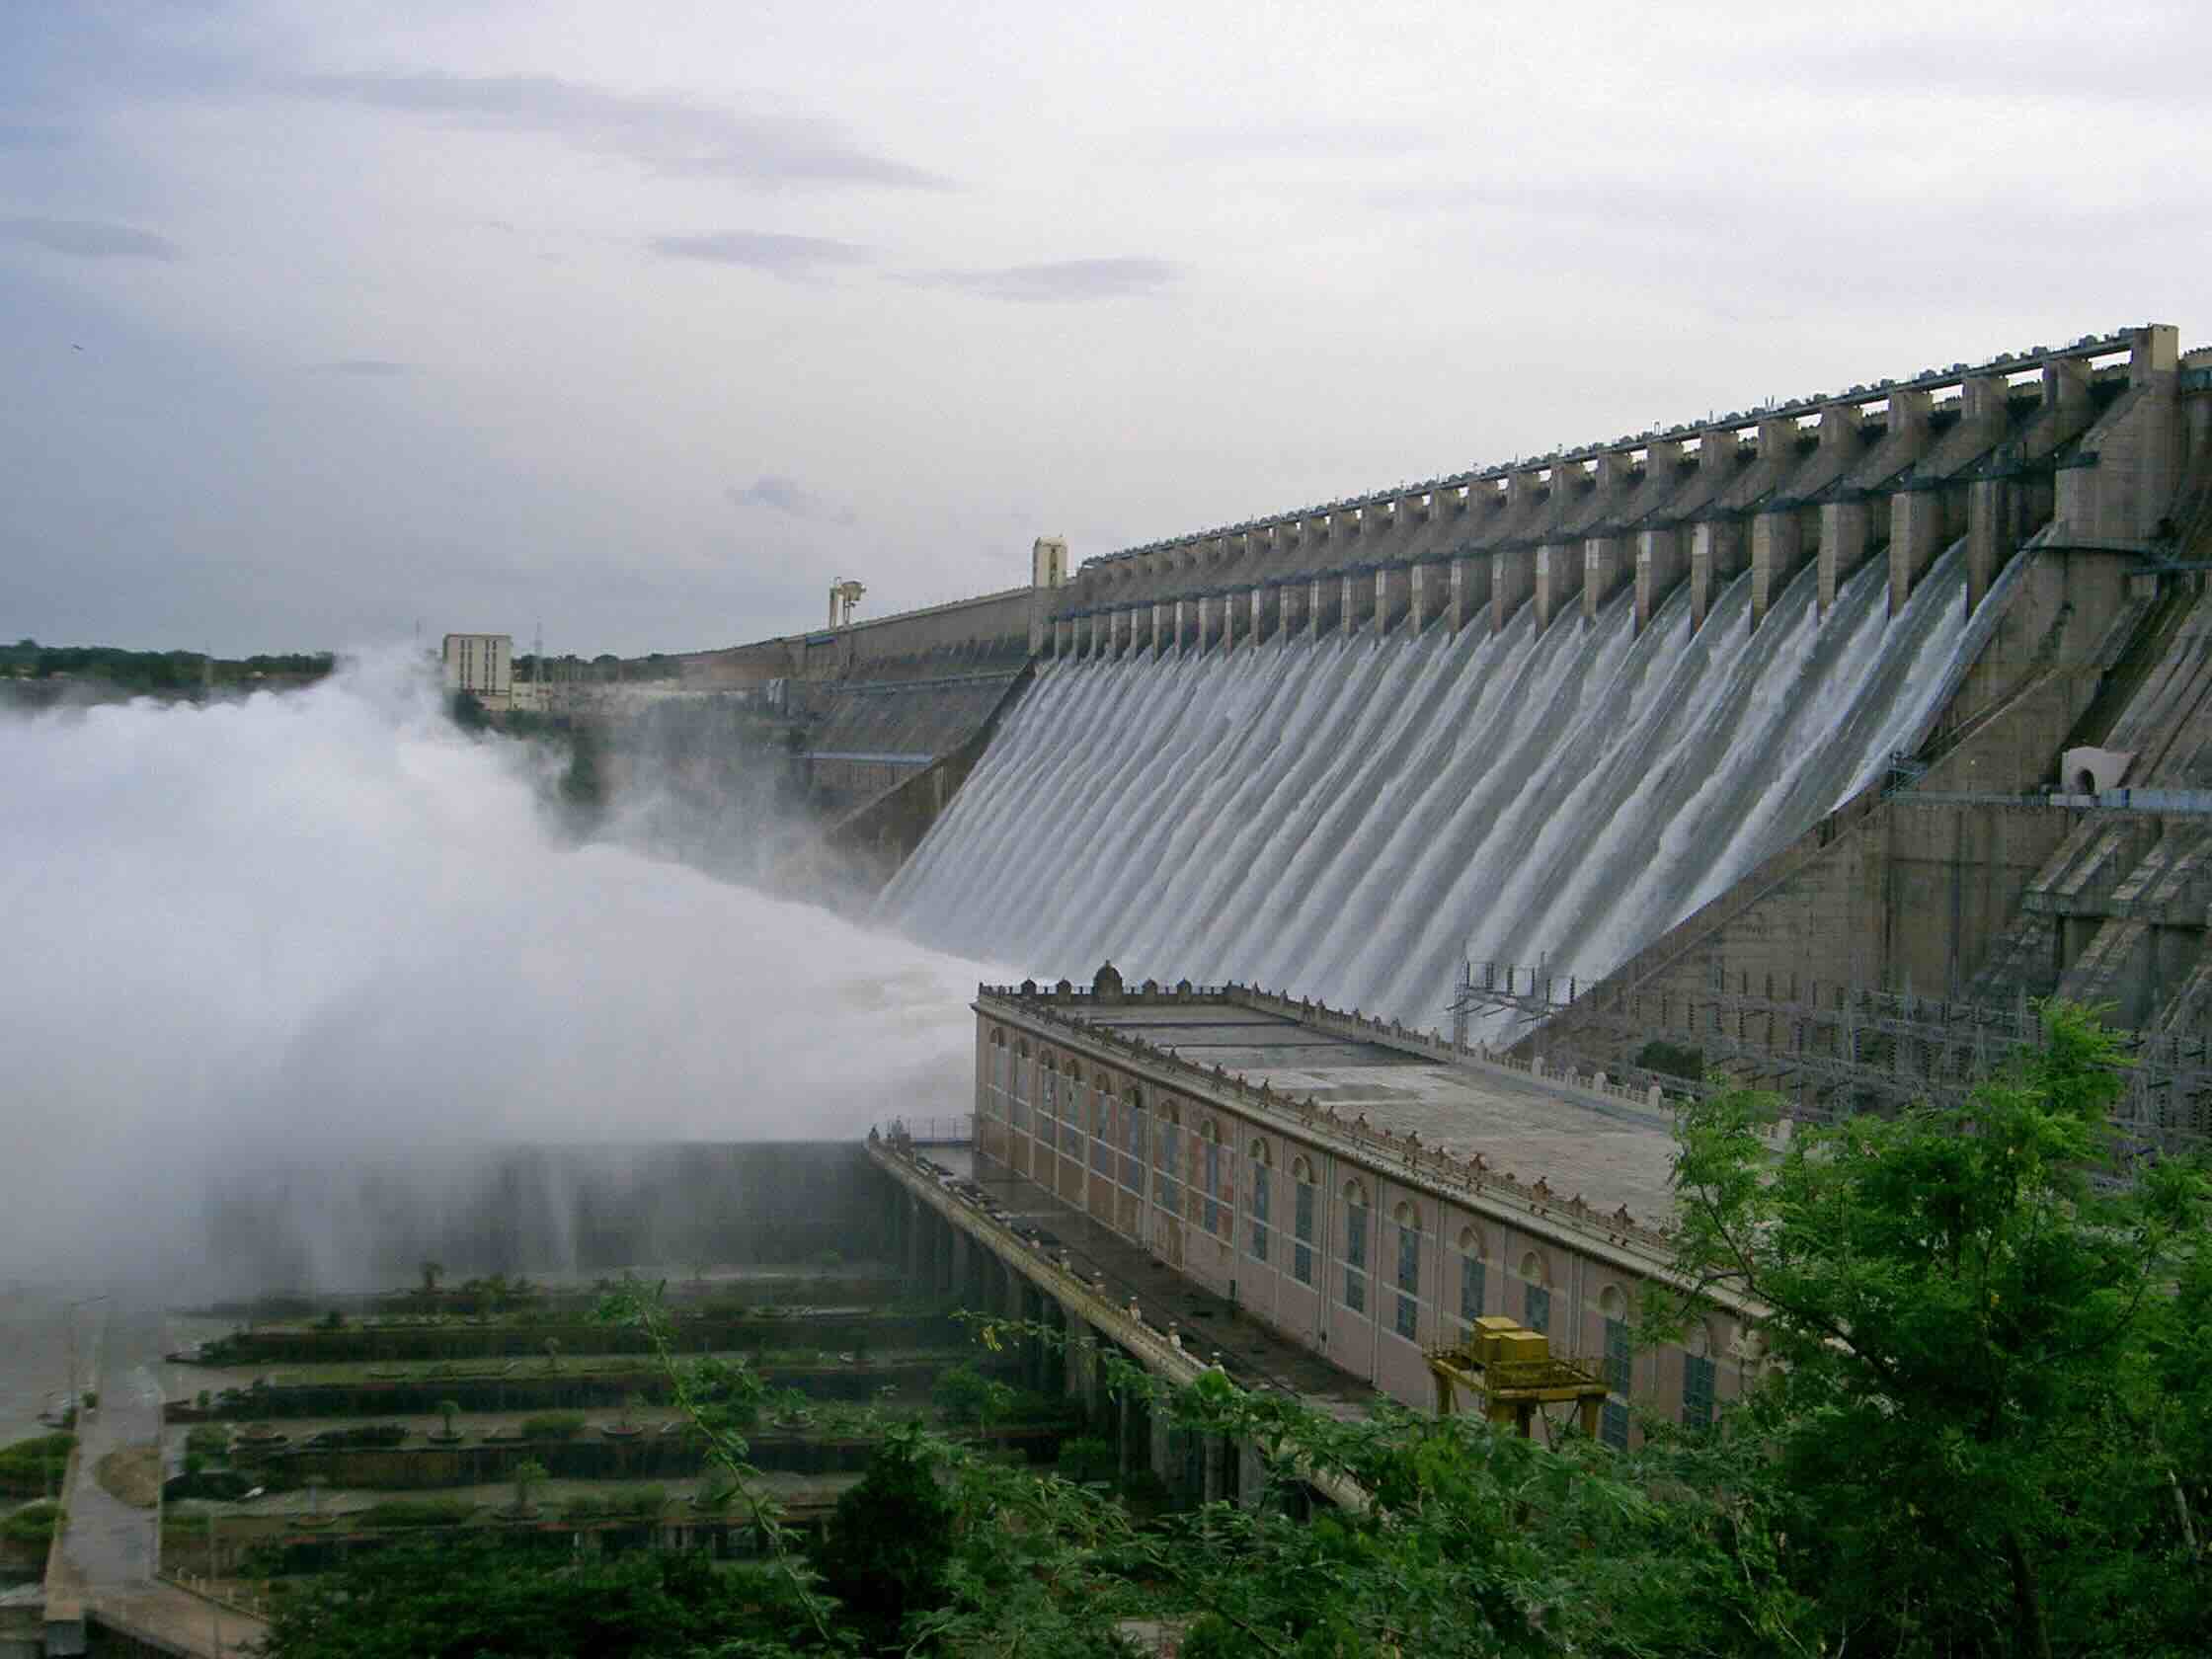 How Does The Construction Of Dams Positively Affect Natural Resources